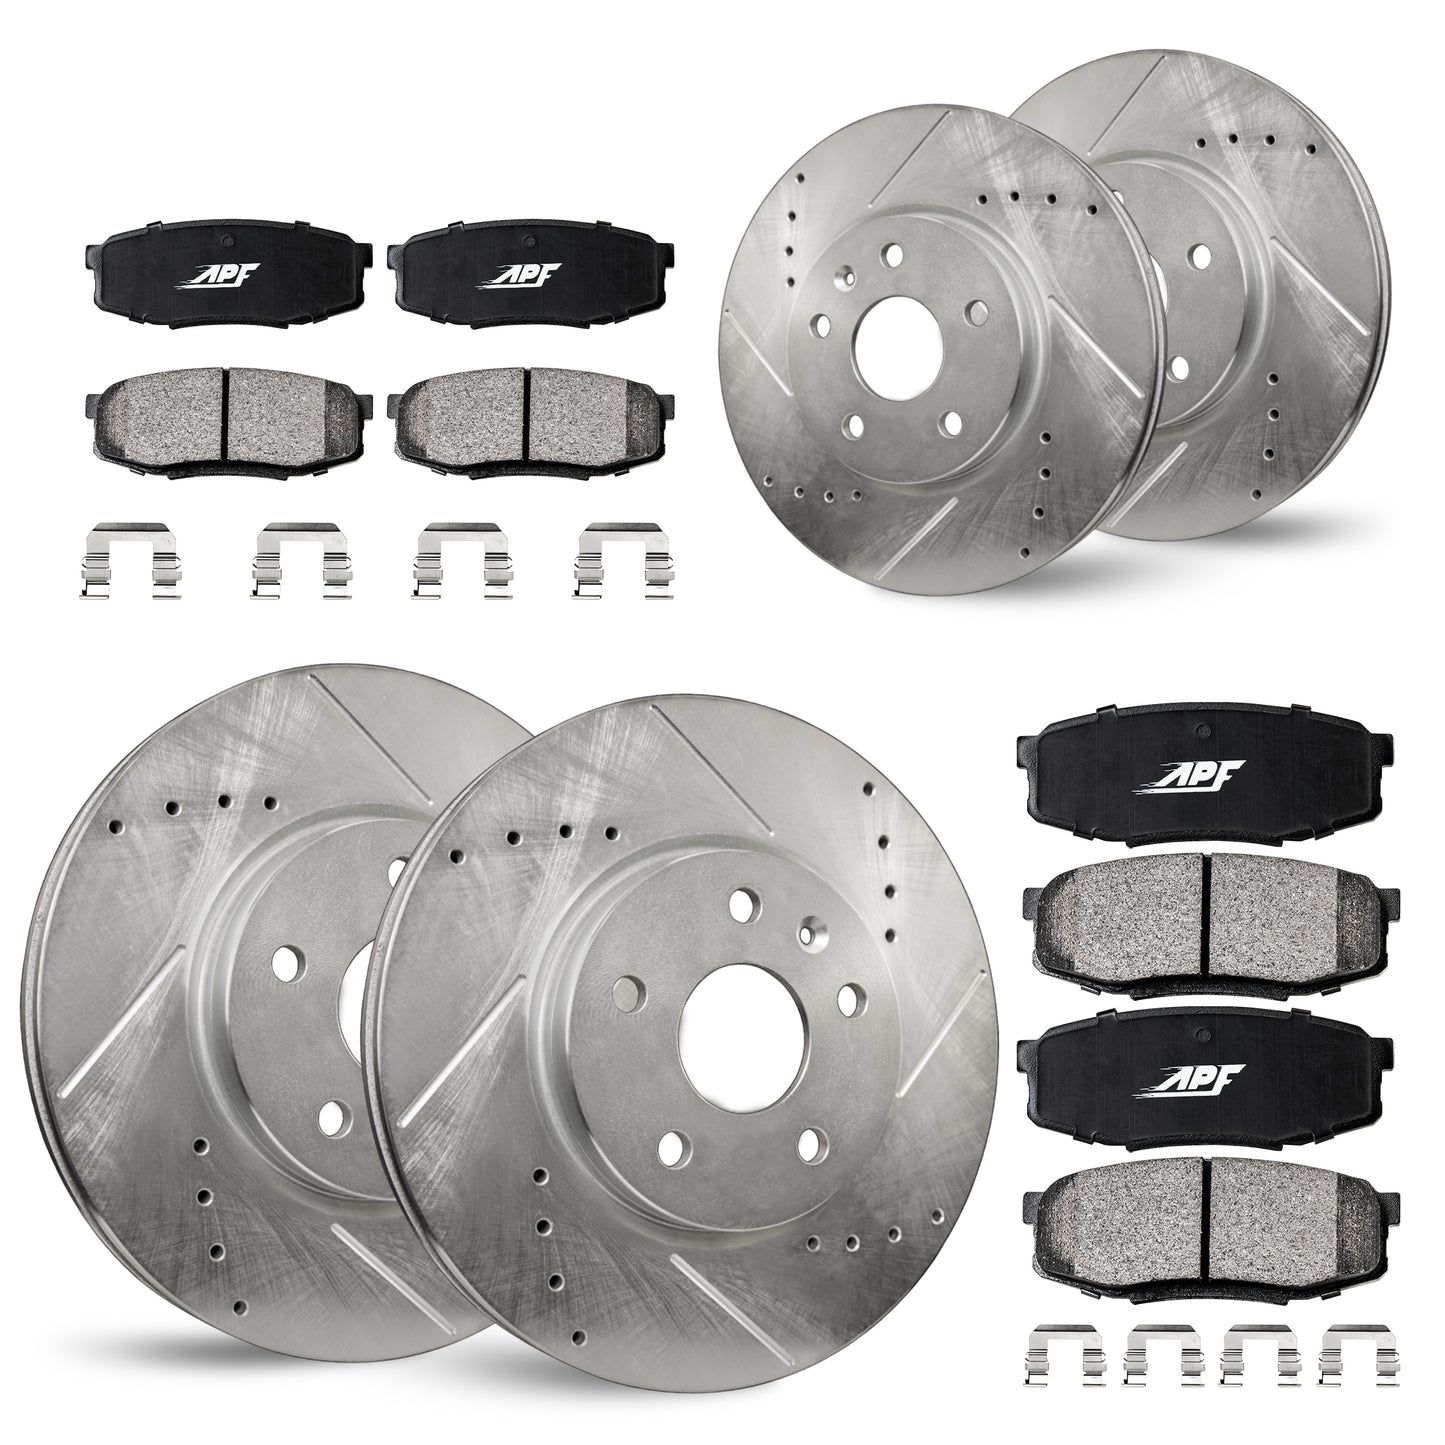 APF Full Kit compatible with Acura MDX 2007-2013 | Zinc Drilled Slotted Rotors with Ceramic Carbon Fiber Brake Pads